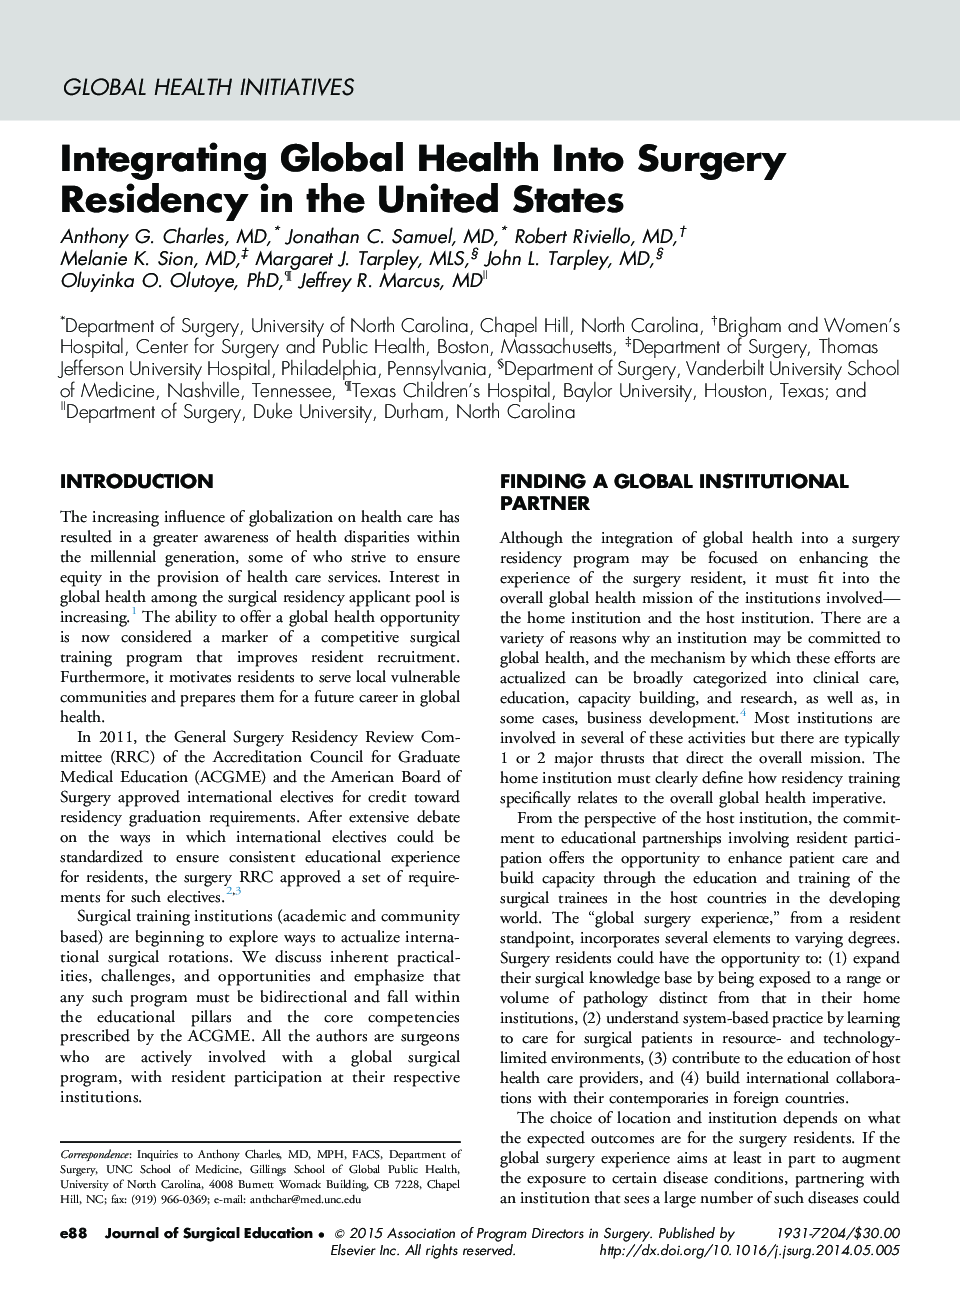 Integrating Global Health Into Surgery Residency in the United States